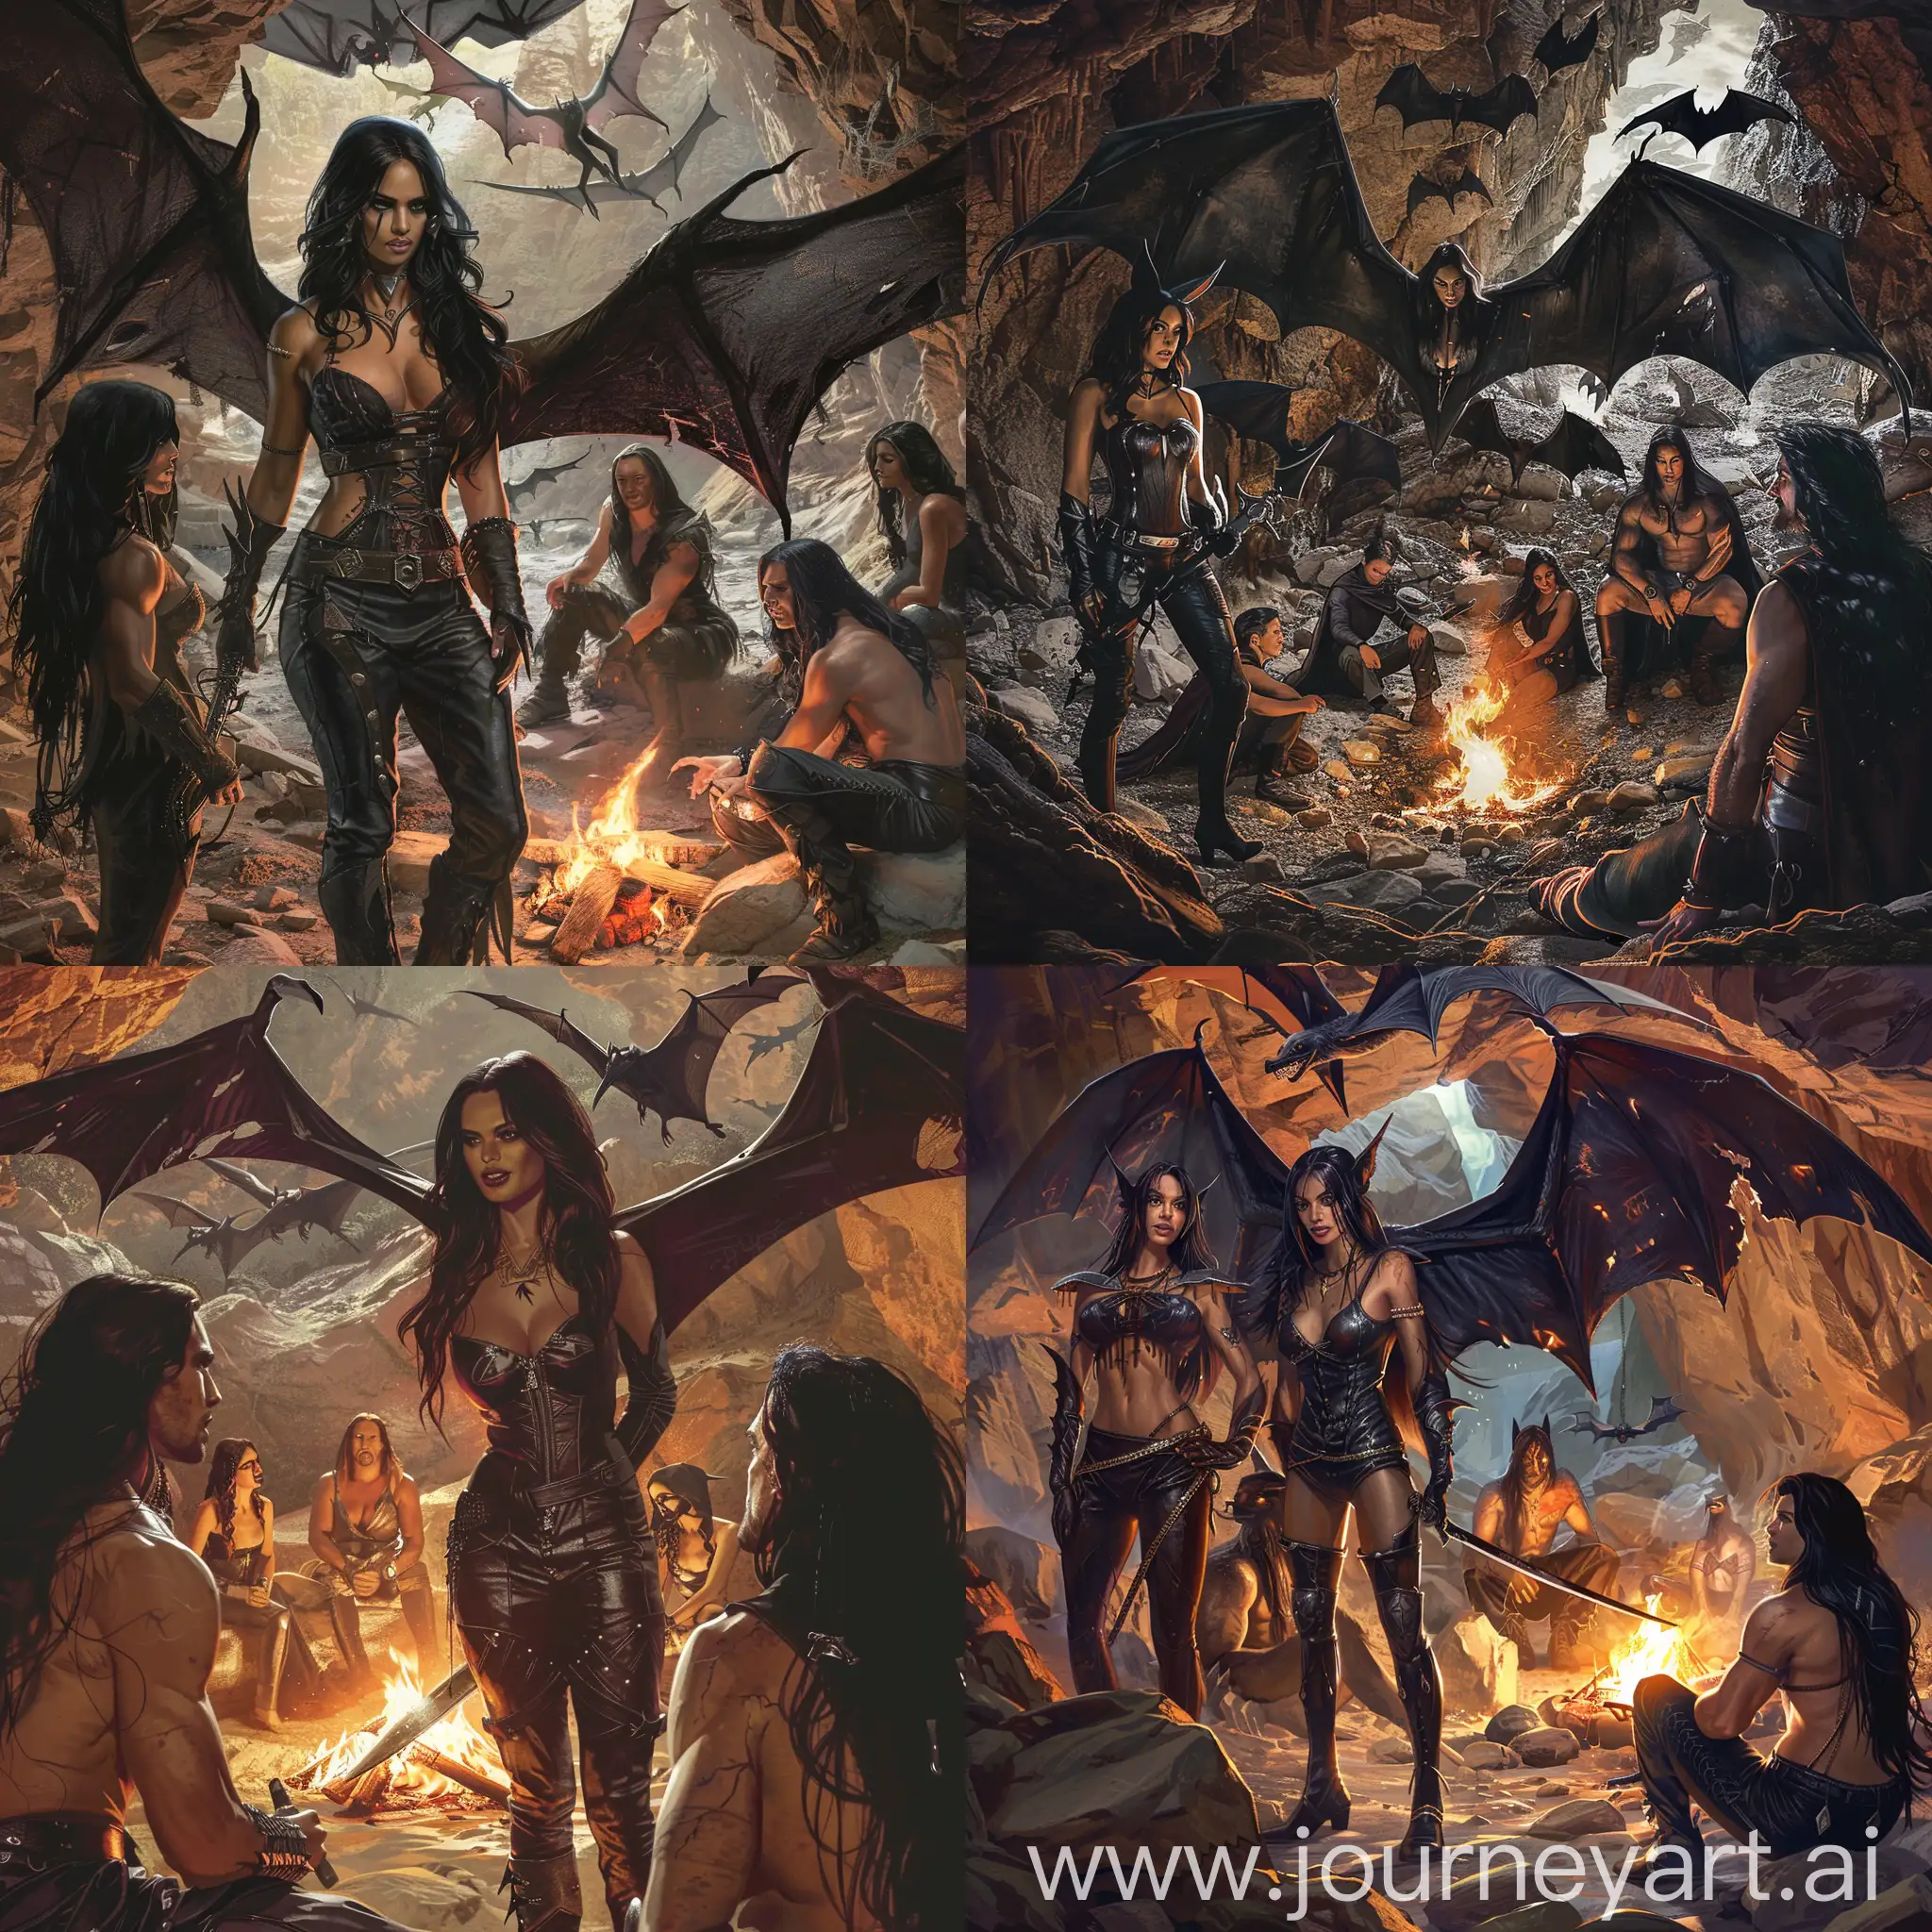 Enchanting-Cave-Gathering-of-BatWinged-Beings-with-DaggerWielding-Protector